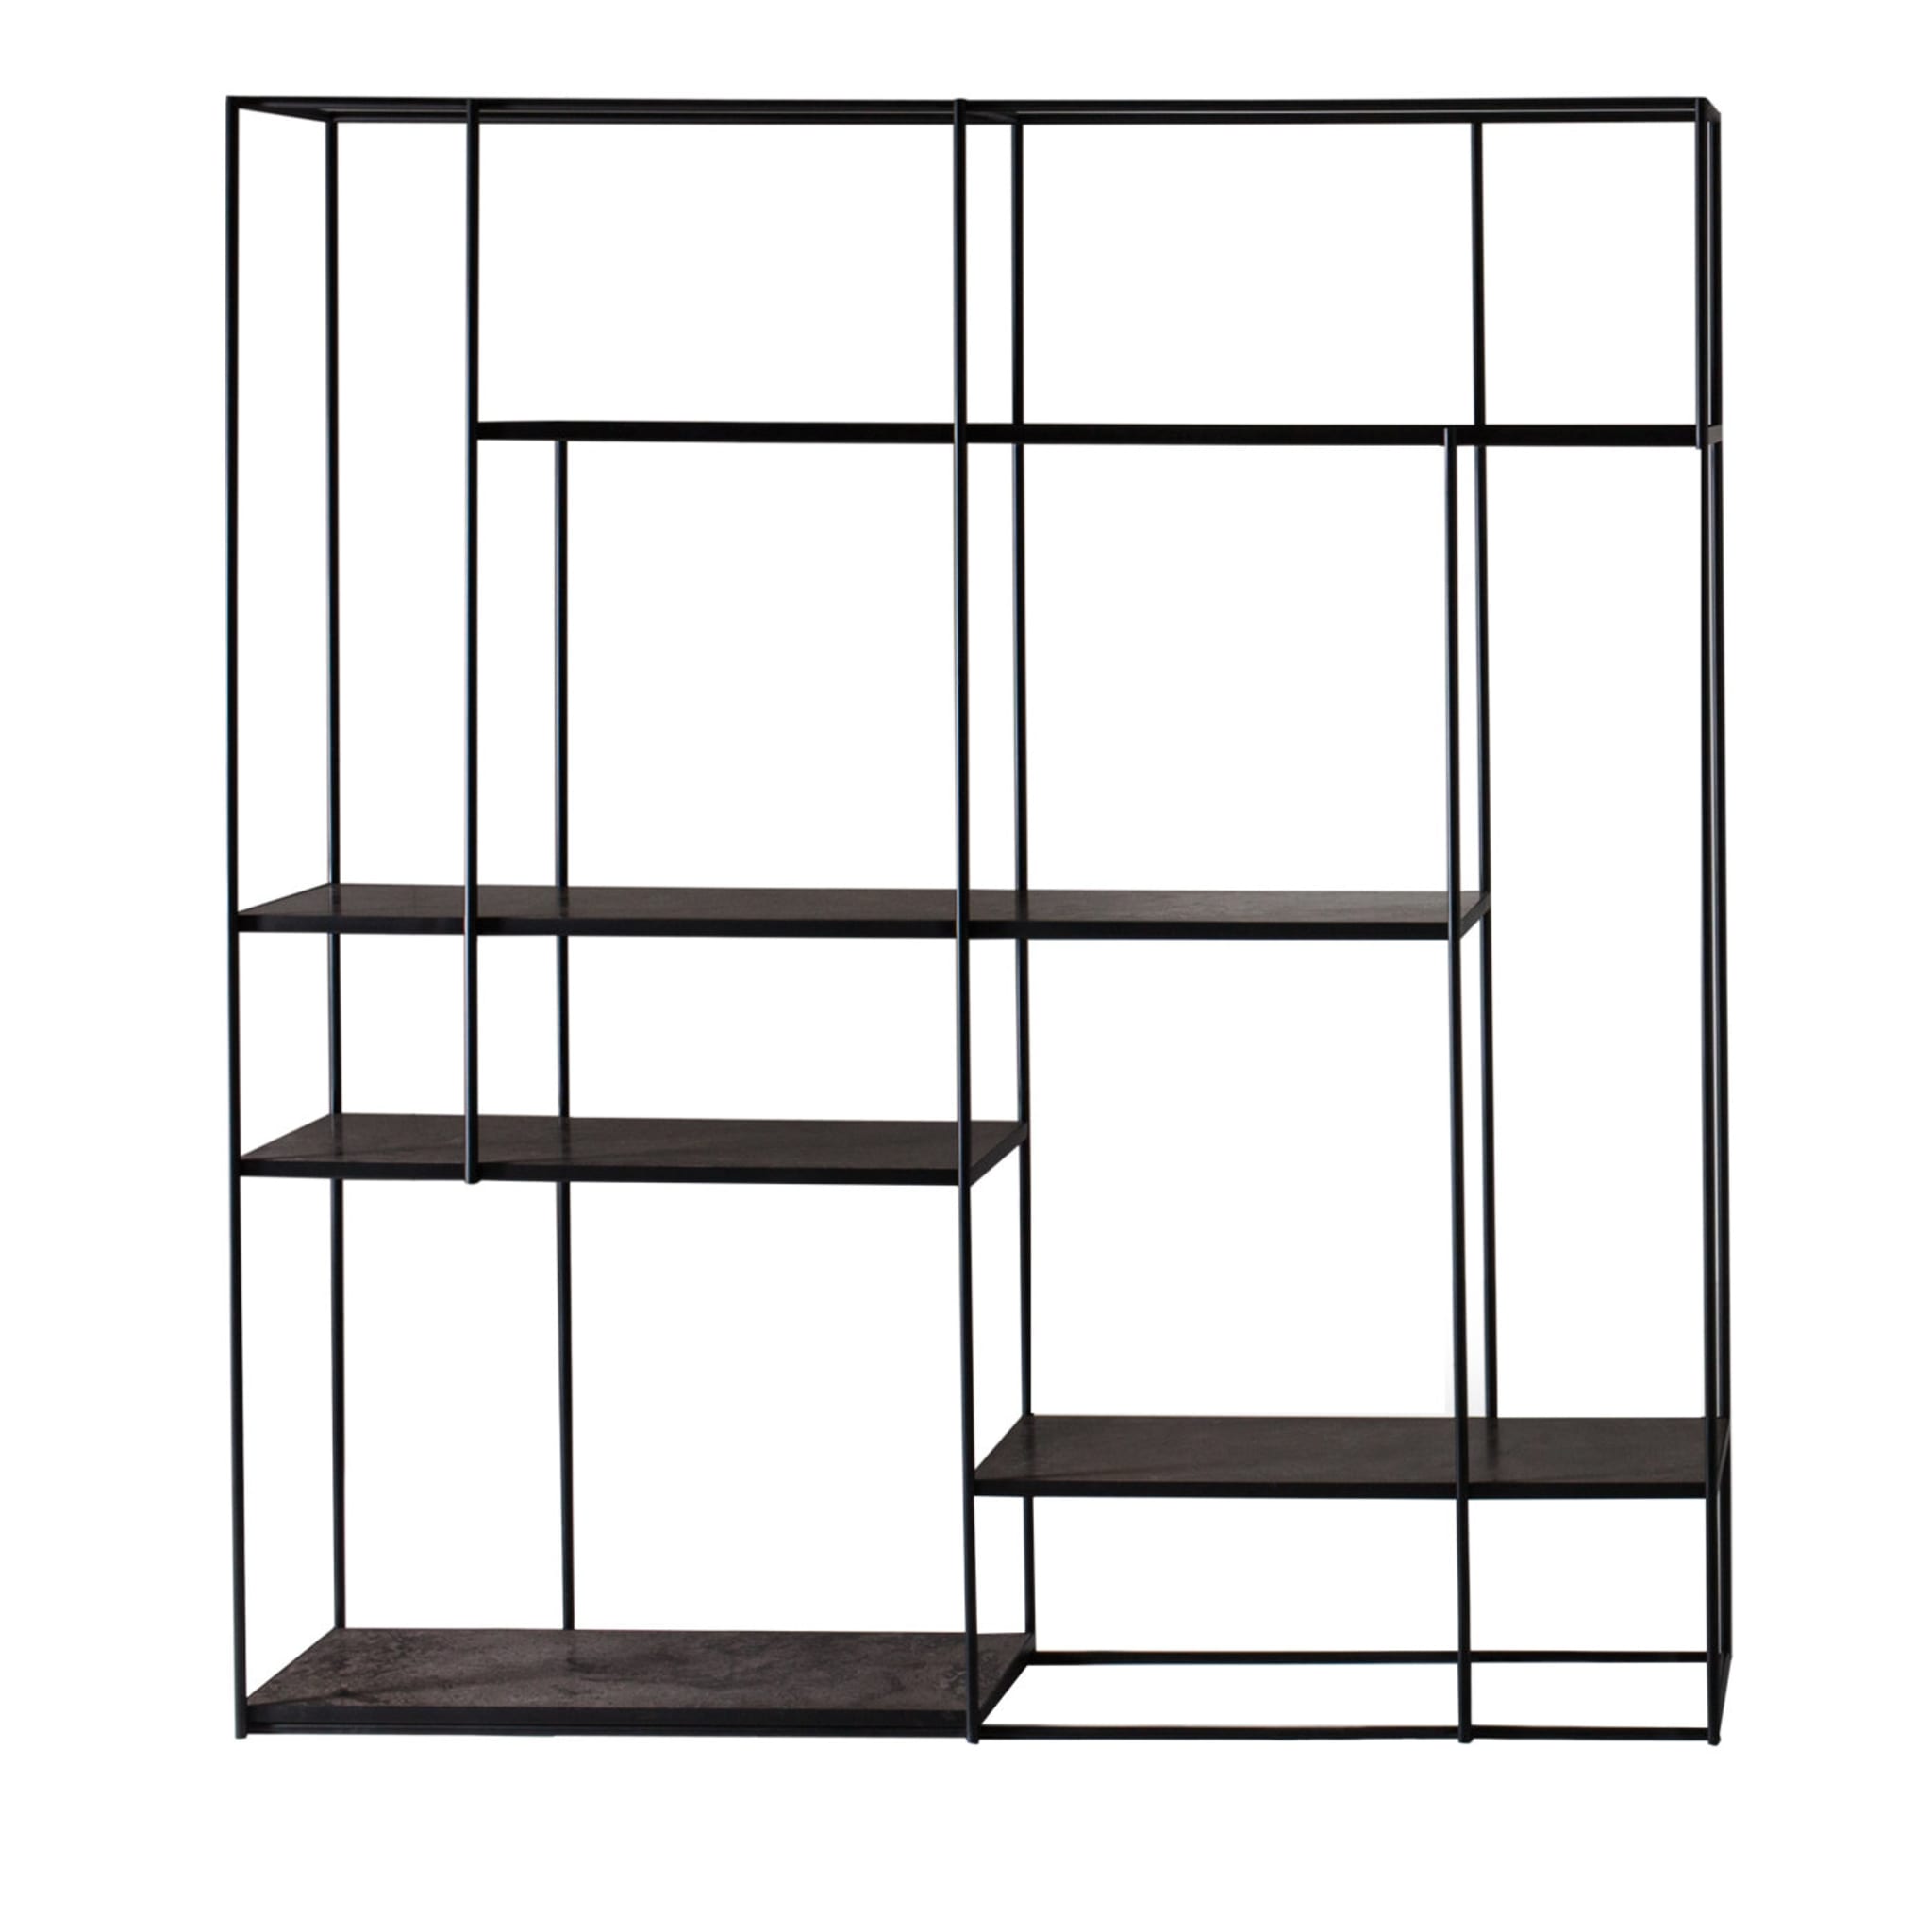 HILL Steel Shelves Bookcase - Main view